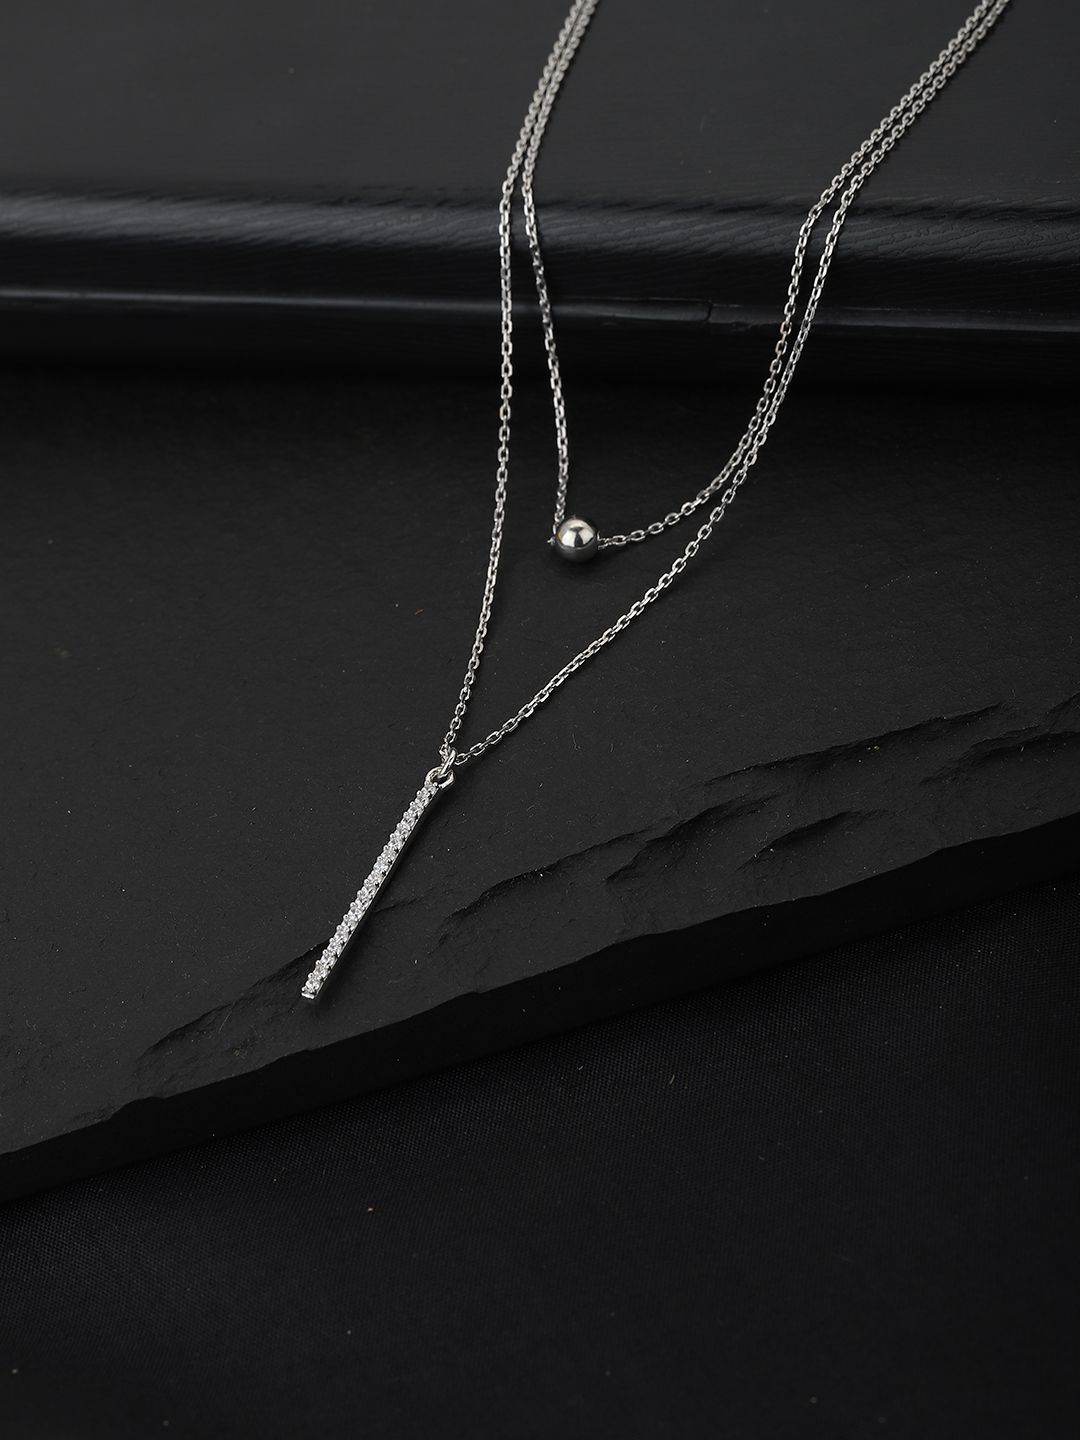 Carlton London Silver-Toned Rhodium-Plated CZ Studded Layered Lariat Necklace Price in India